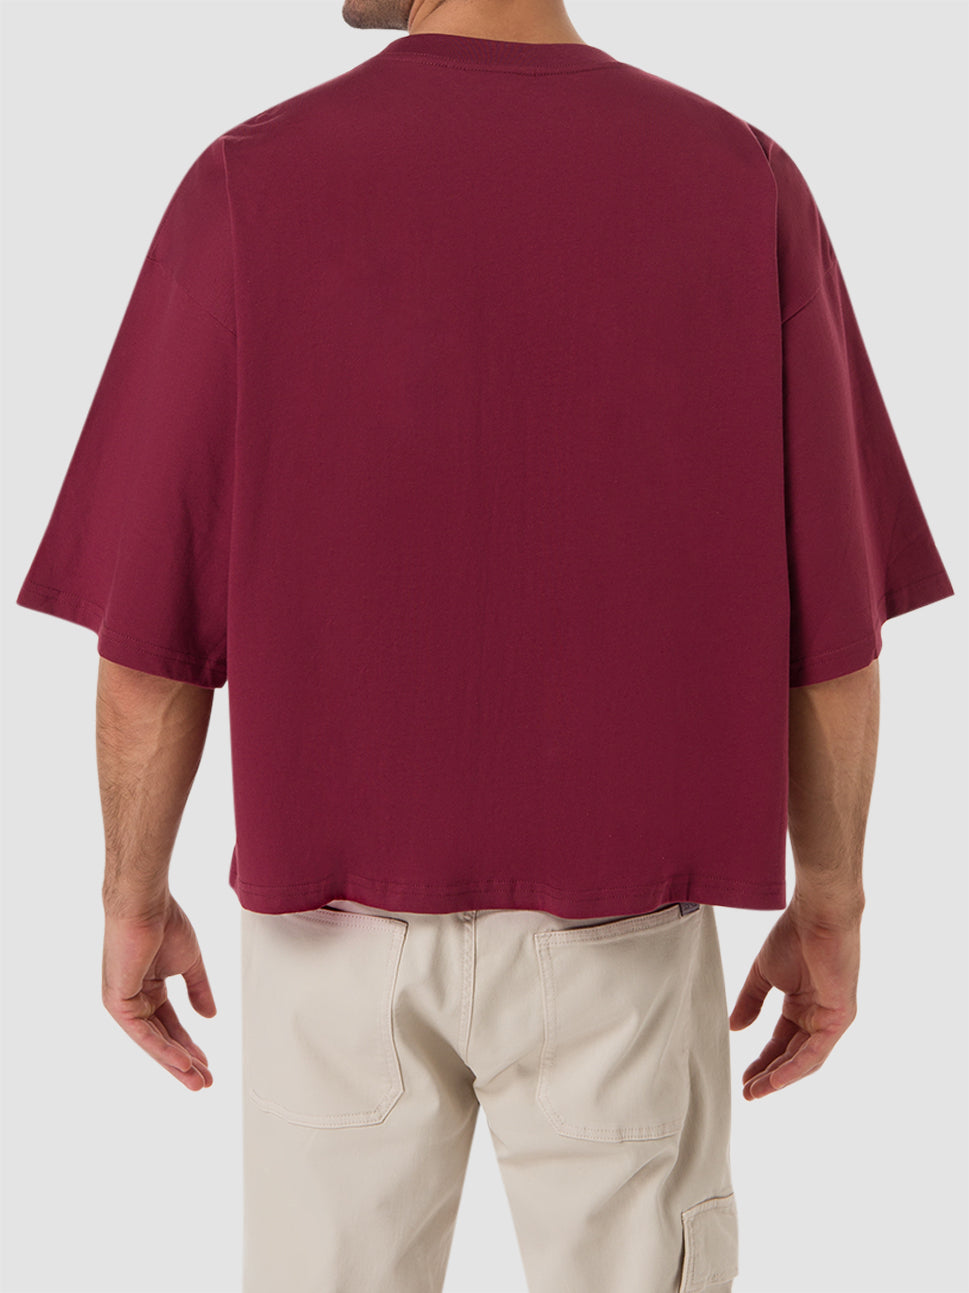 Shop the latest trending Maroon color Drew House T-Shirts & Tops